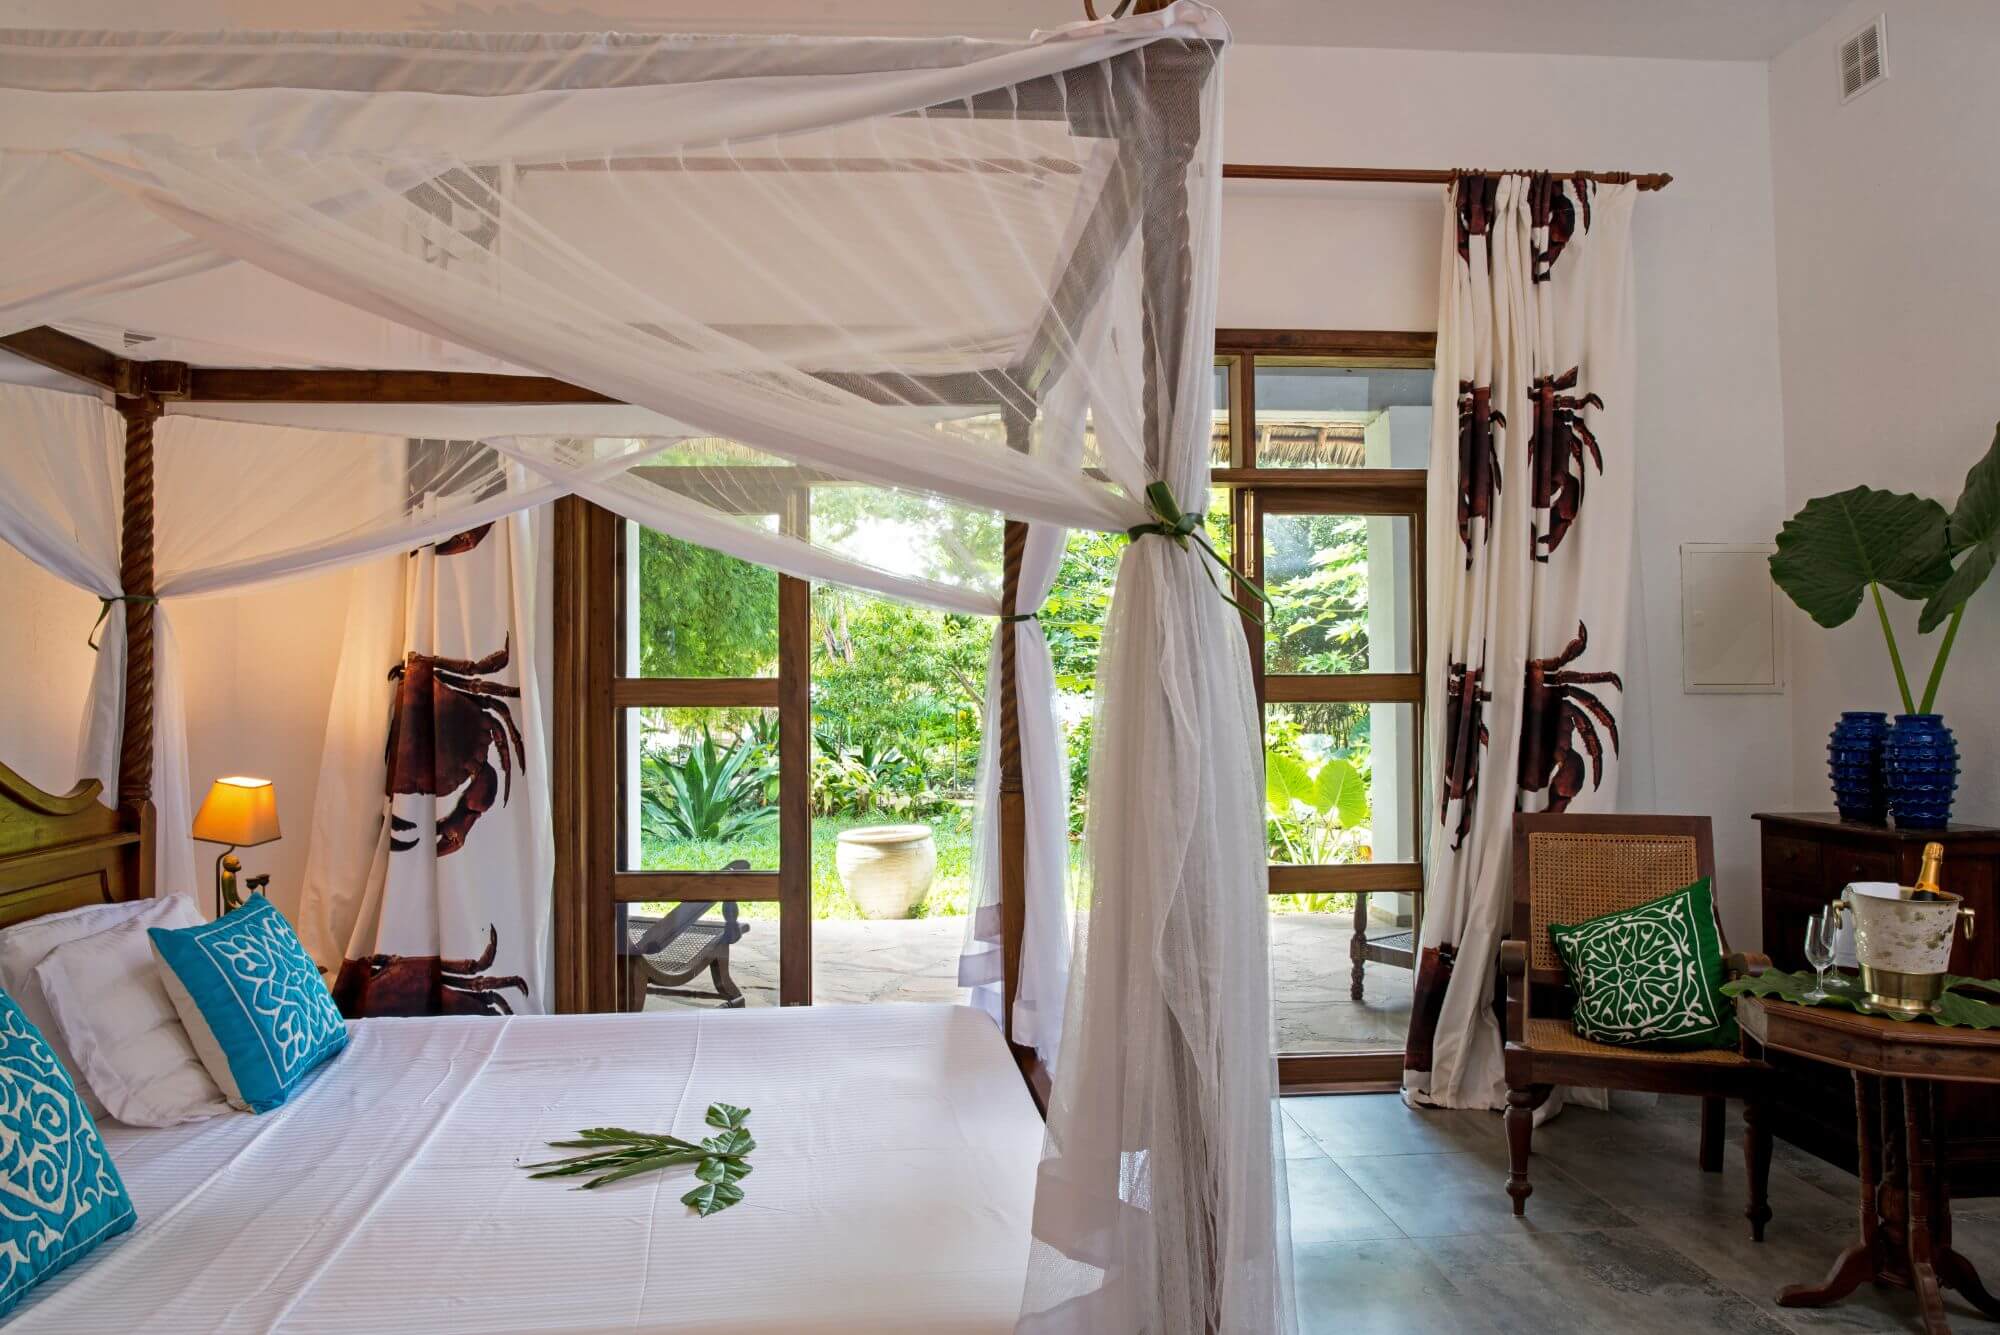 Tikitam Palms Boutique Hotel - Rooms (4) - 